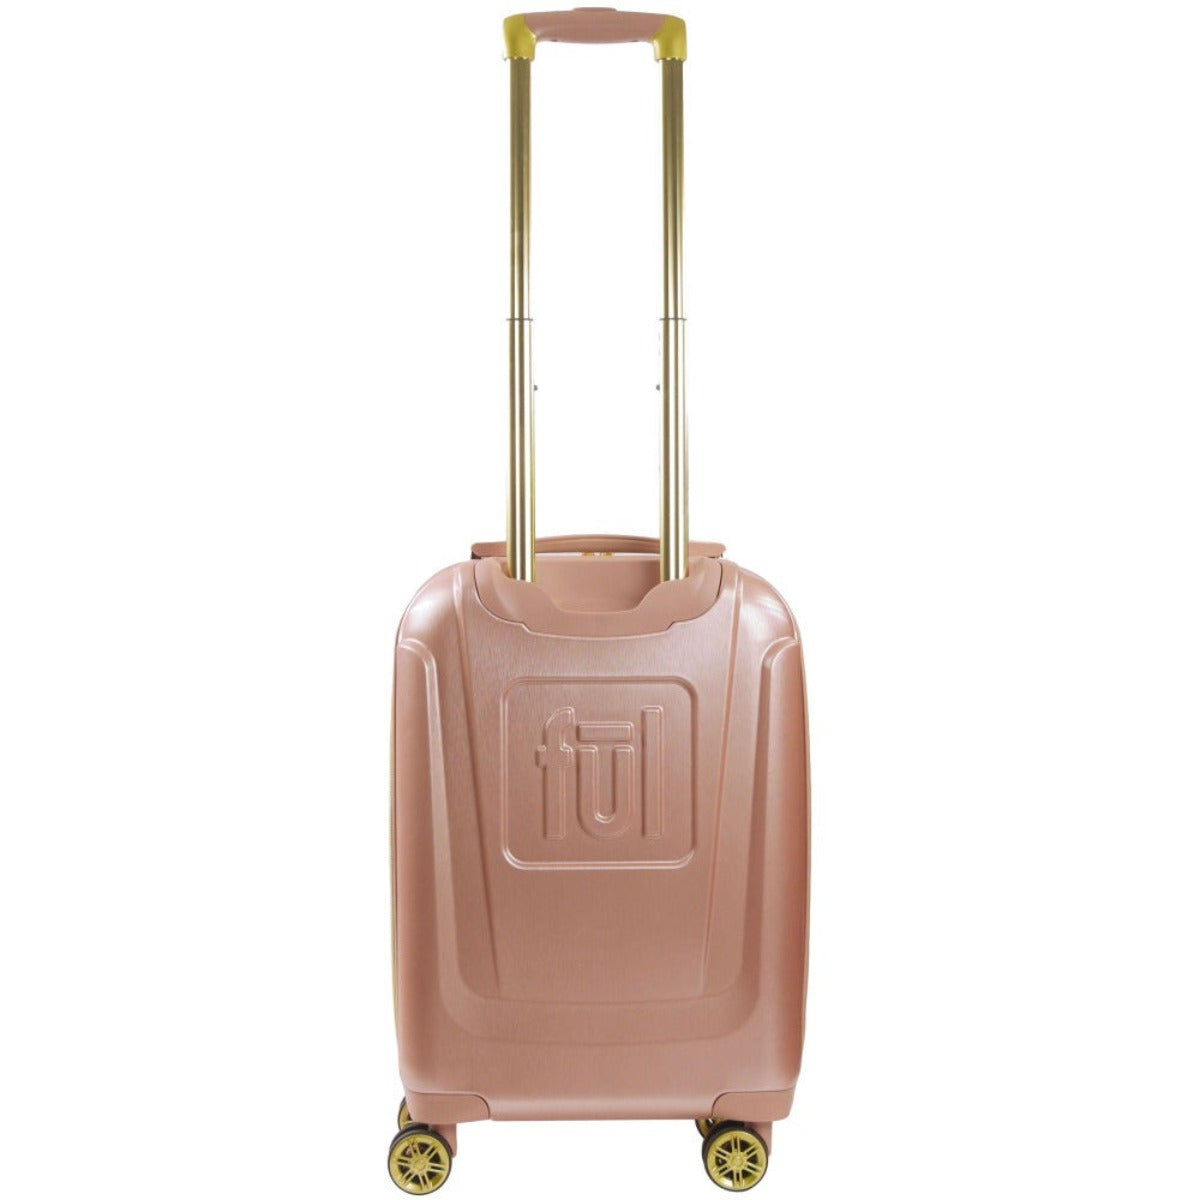 Adult Disney Luggage Mickey Mouse Texture Rolling Hard Sided Carry-on Spinner Suitcase Rose Gold 22.5"